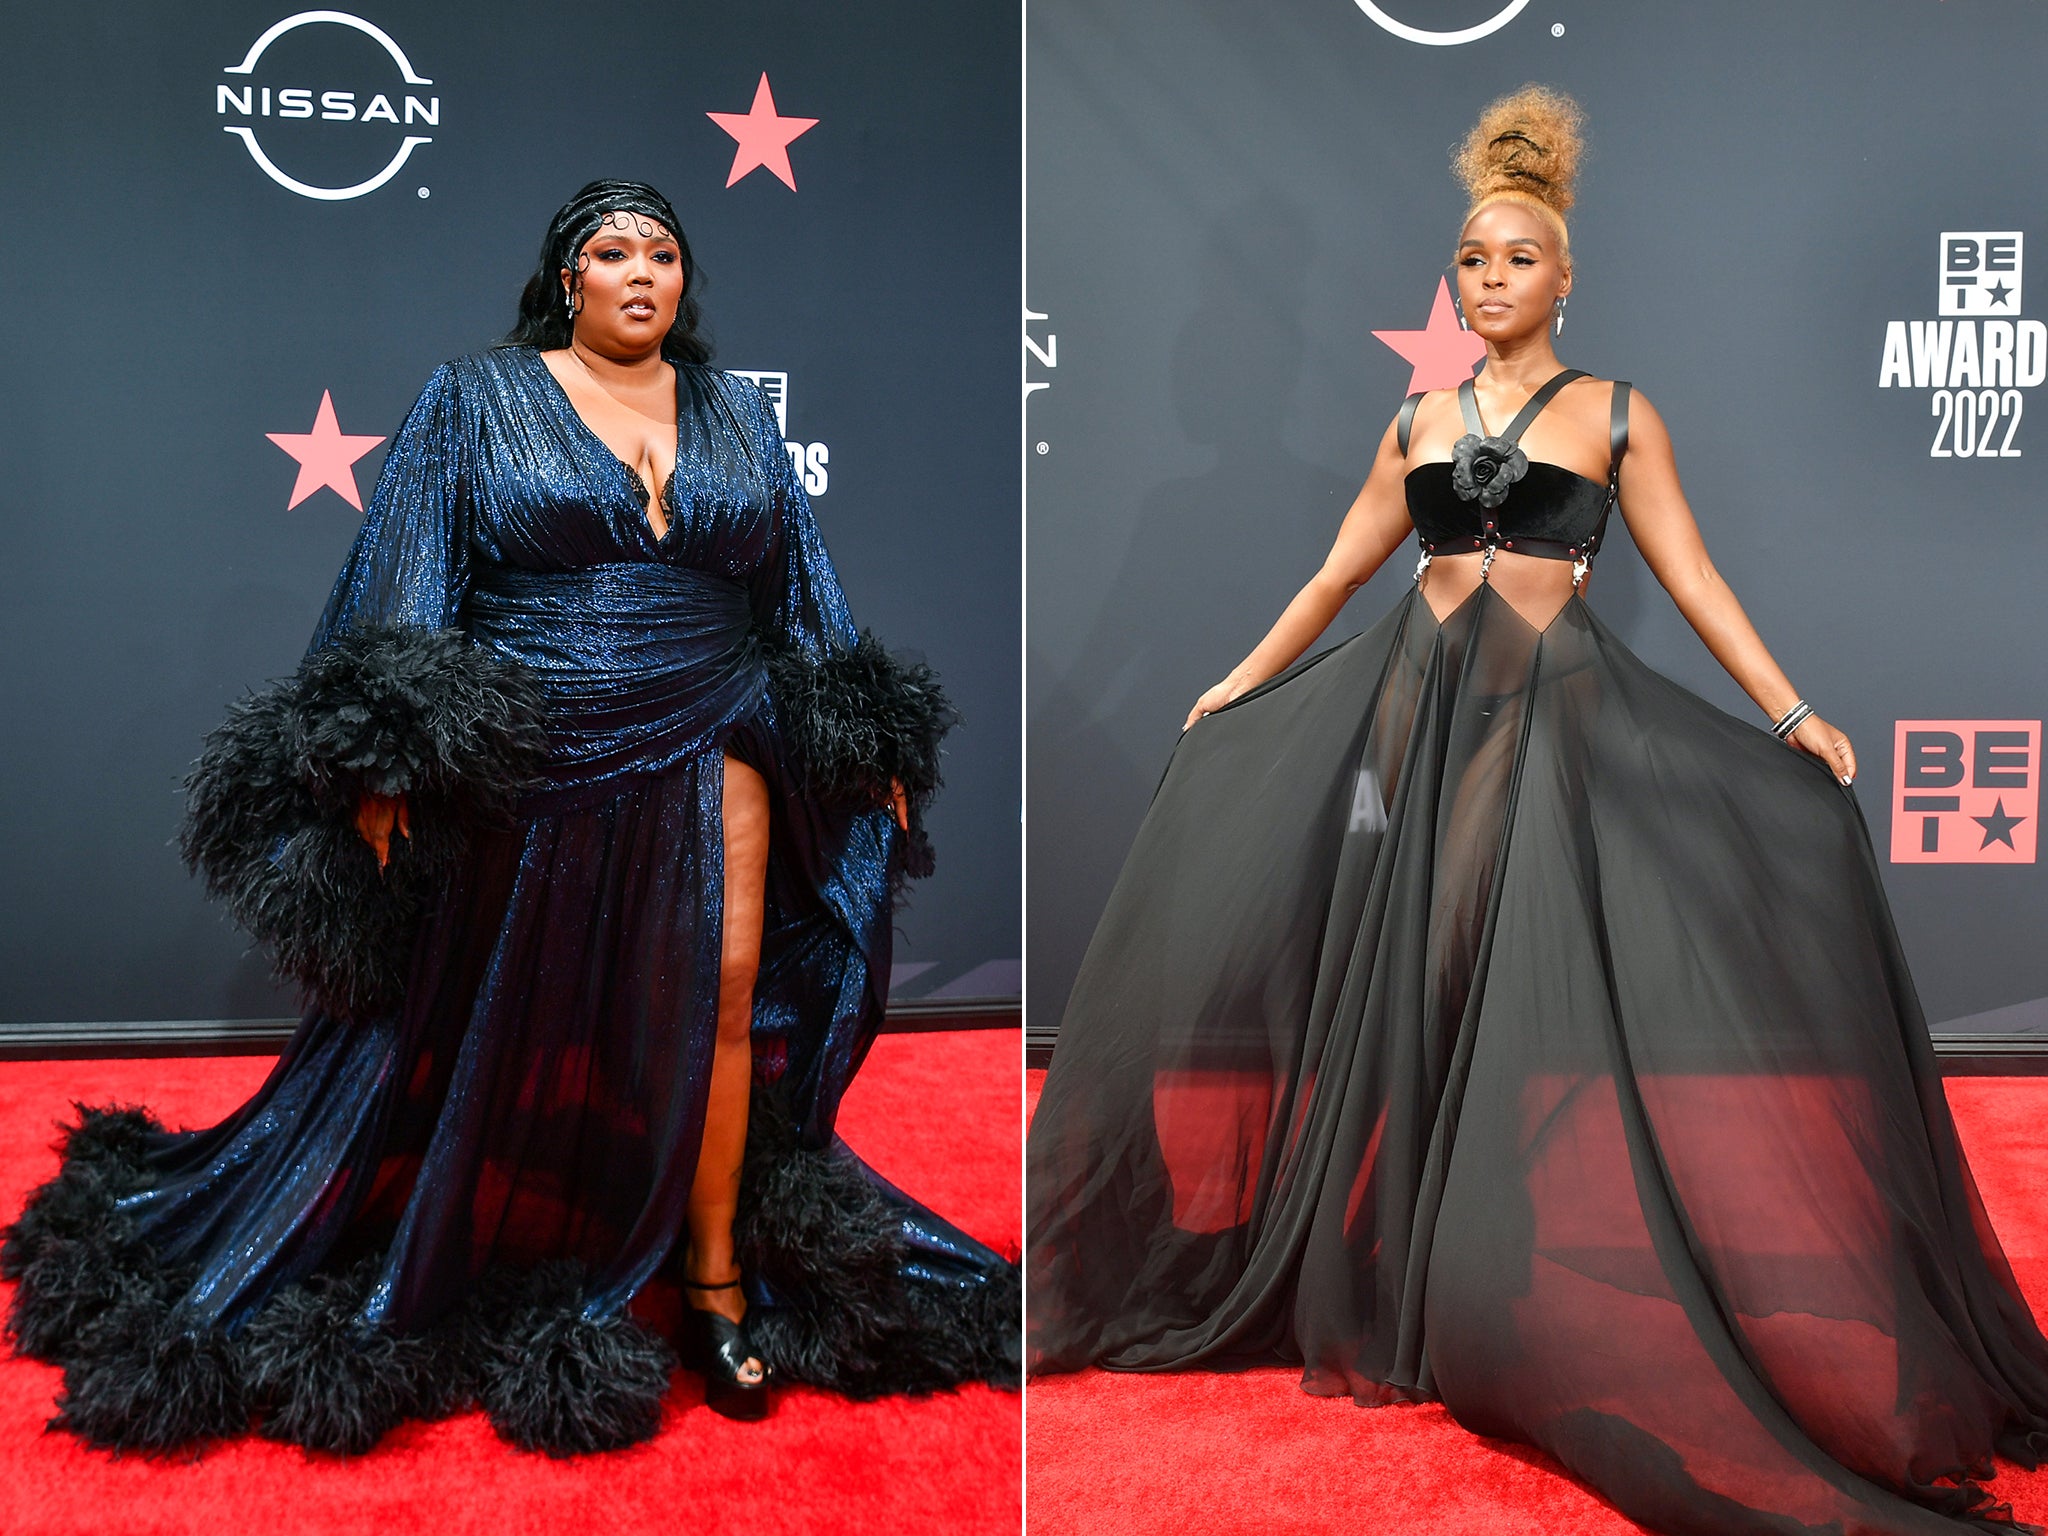 Lizzo (L) and Janelle Monáe on the red carpet at the 2022 BET Awards in Los Angeles